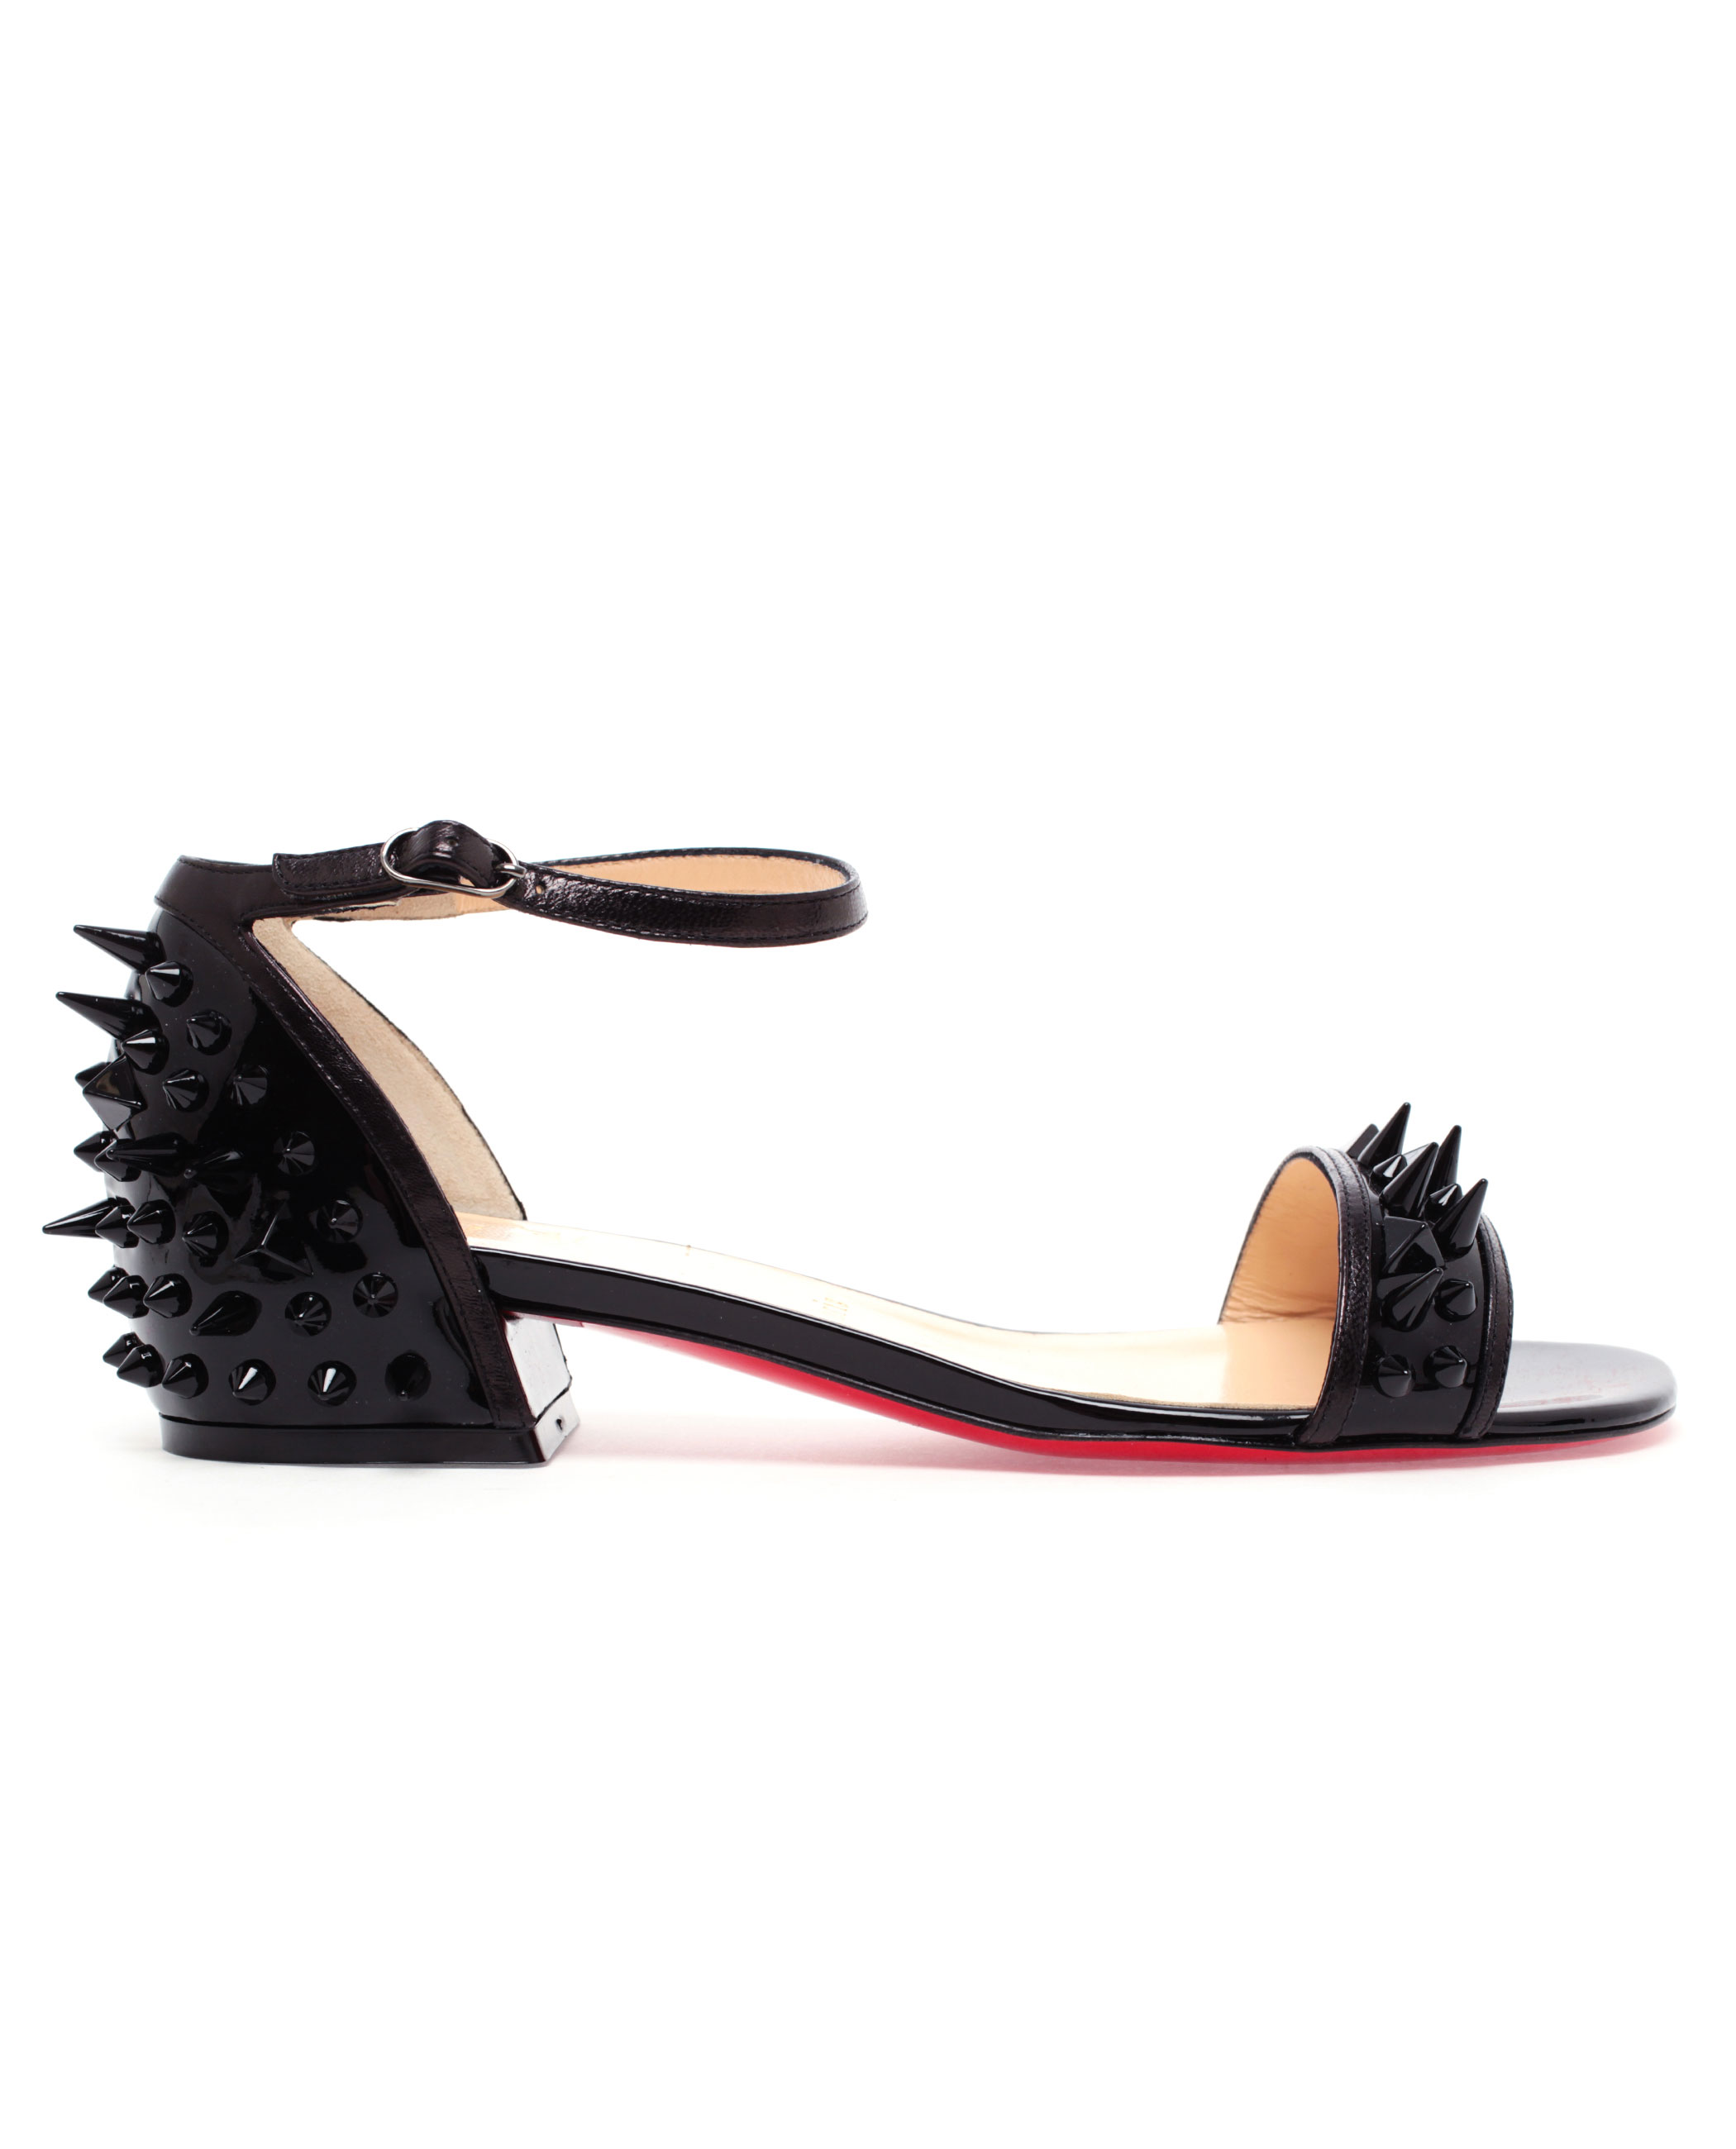 christian louboutin Druide Spike sandals Black patent leather ...  